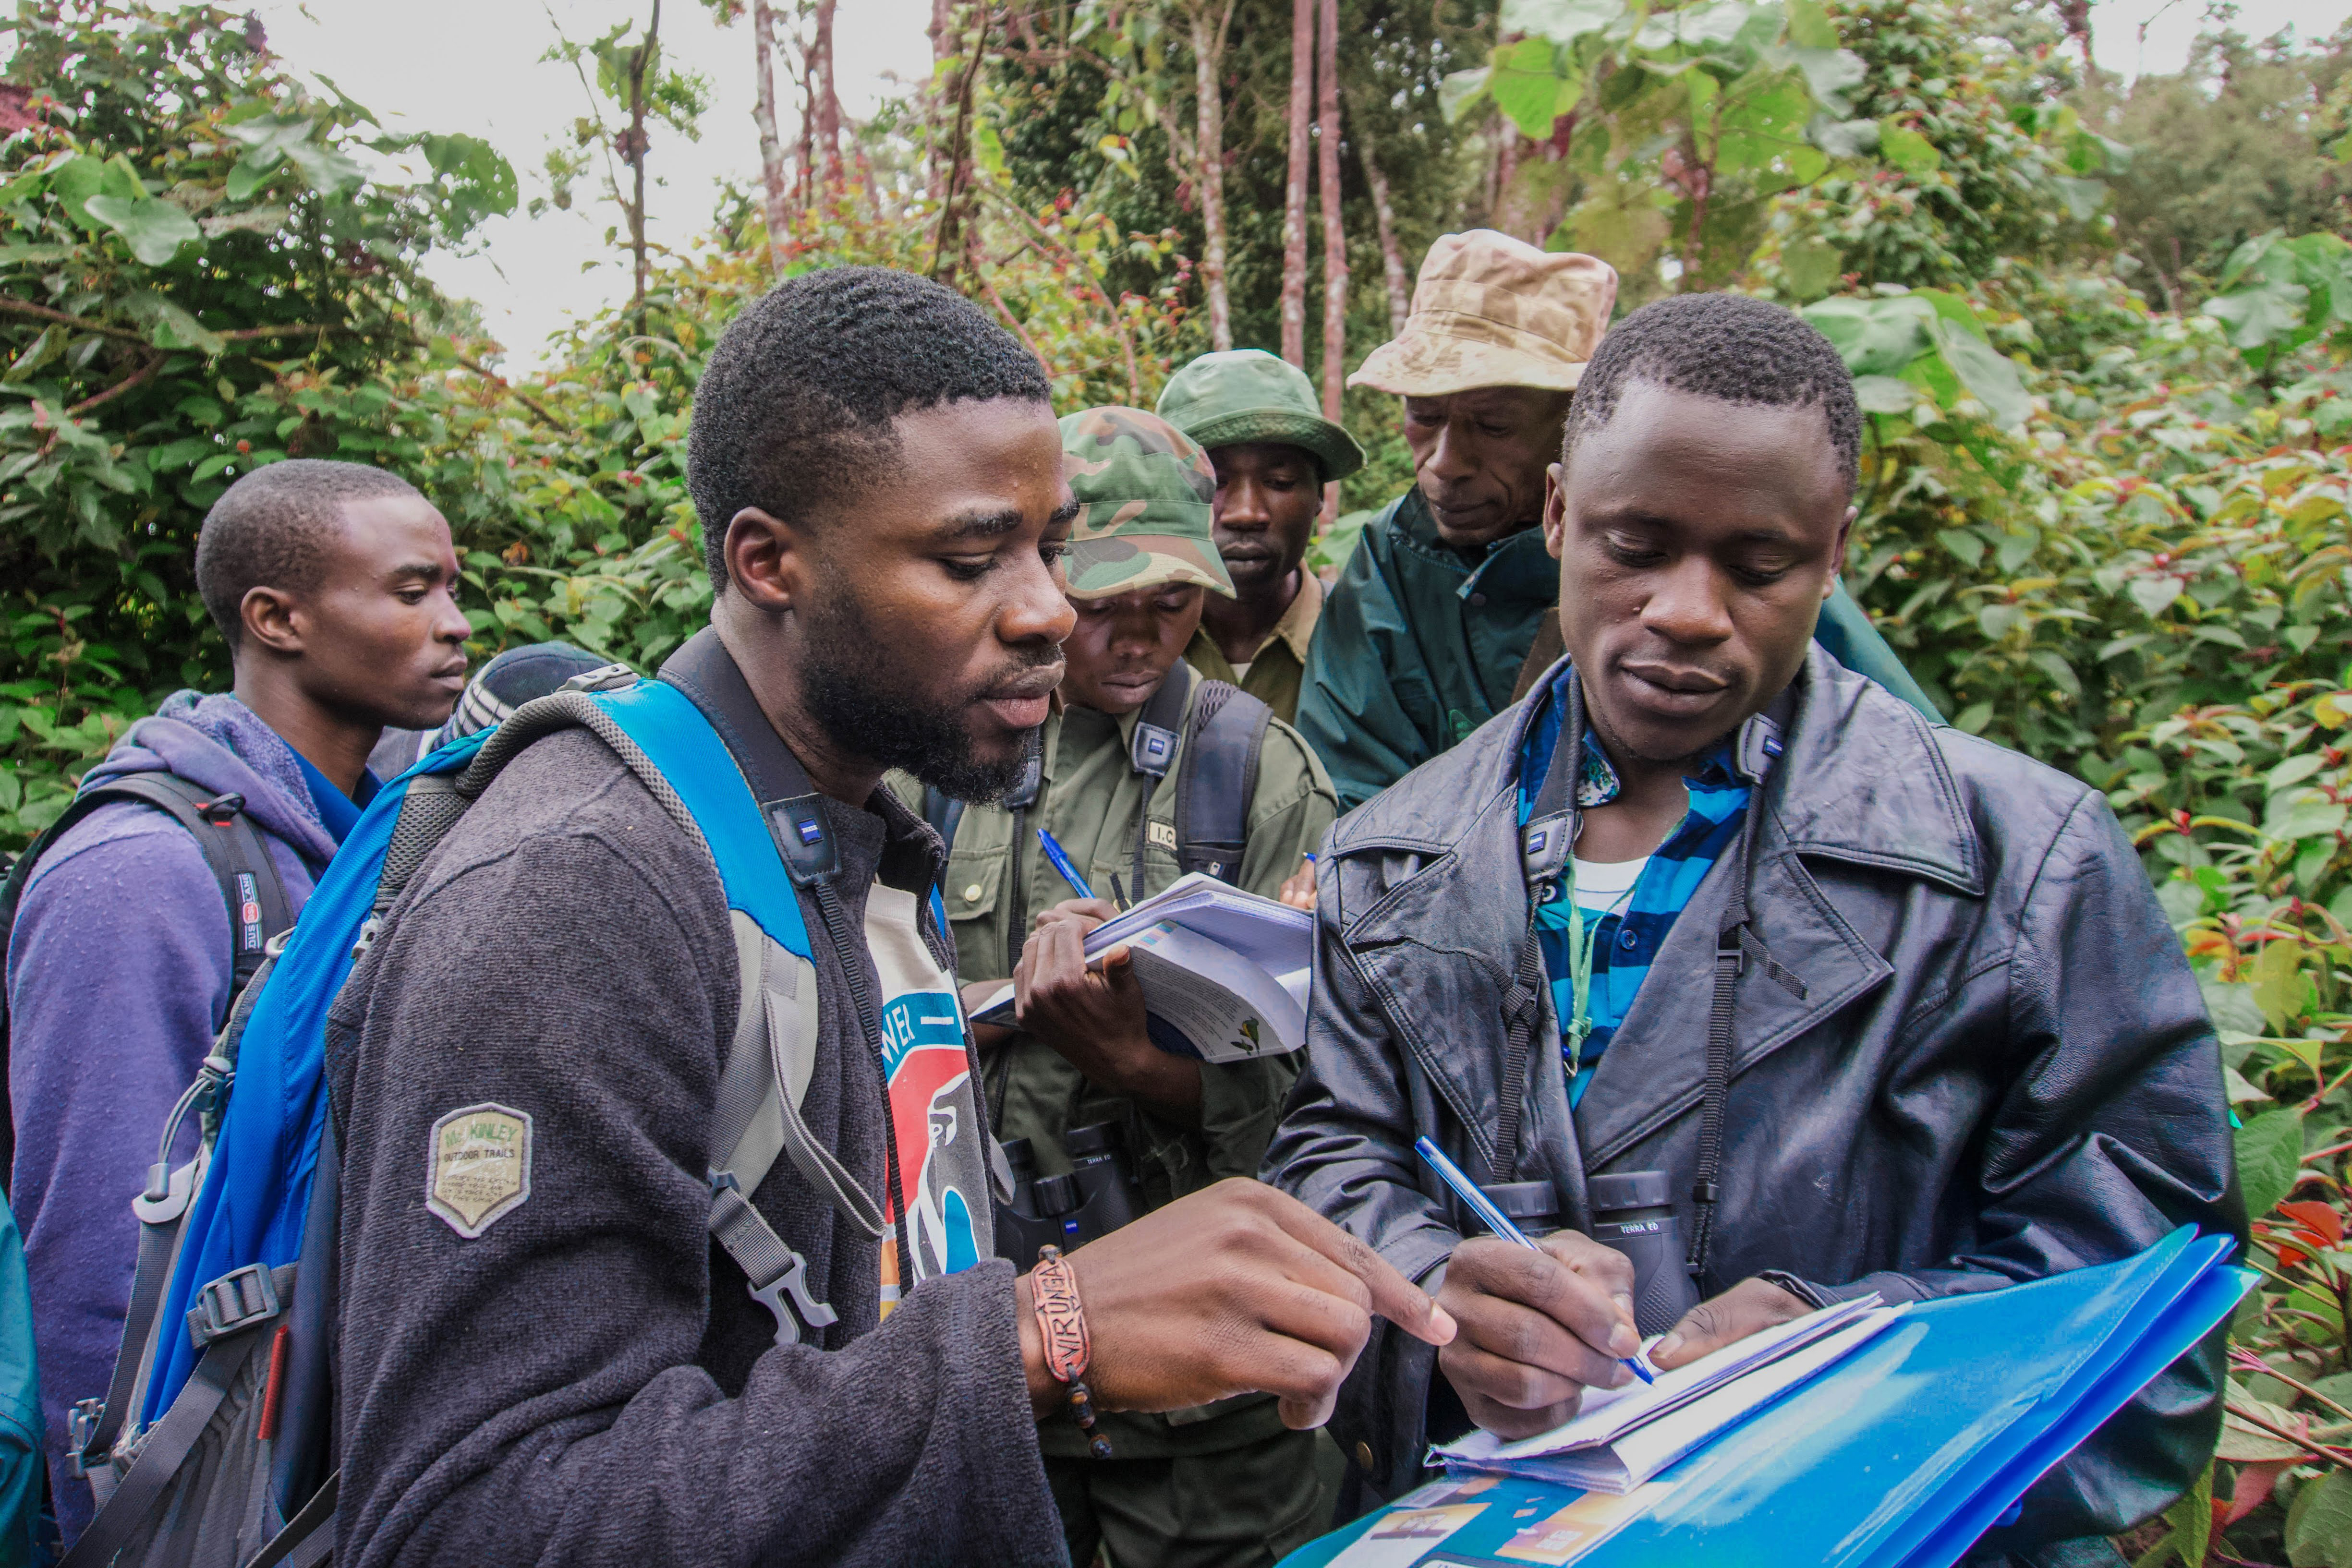 ICCN staff and ecoguards practice their bird identification skills at a training facilitated by the U.S. Forest Service in Kahuzi-Biega. (Photo by Olivia Freeman/U.S. Forest Service International Programs)